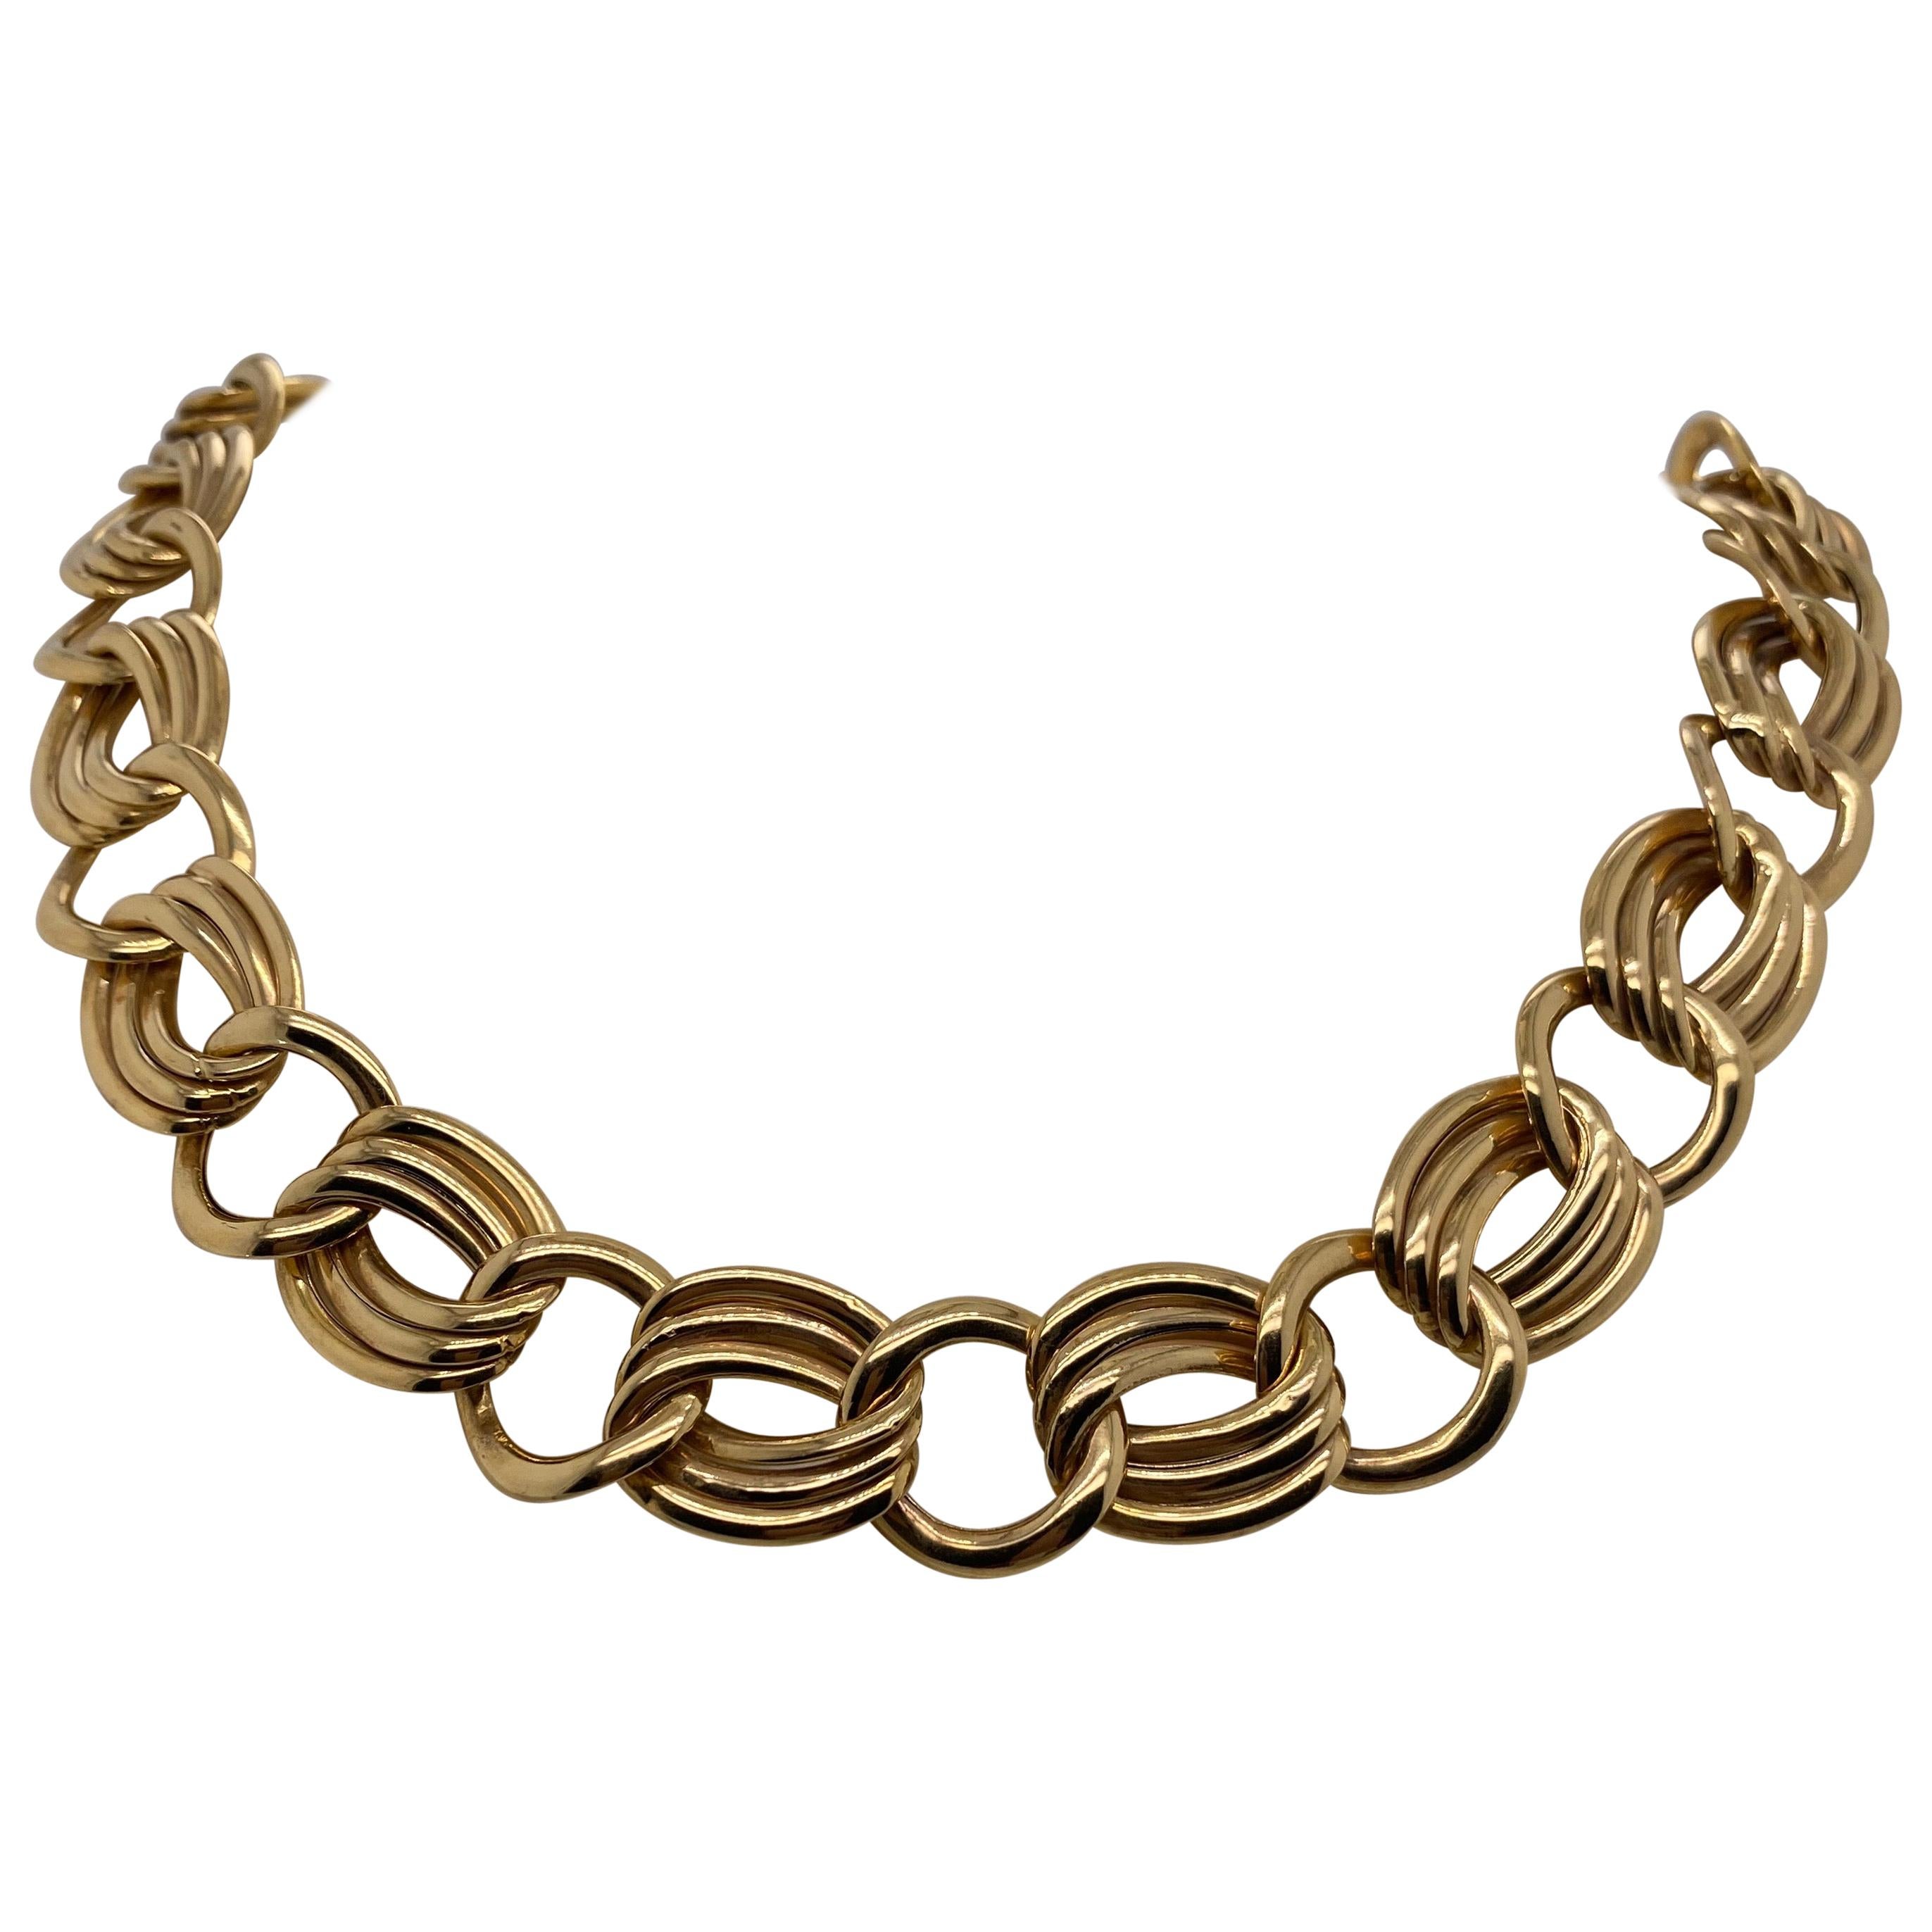 Vintage 1980s 14 Karat Yellow Gold Italian Wide Cable Link Necklace